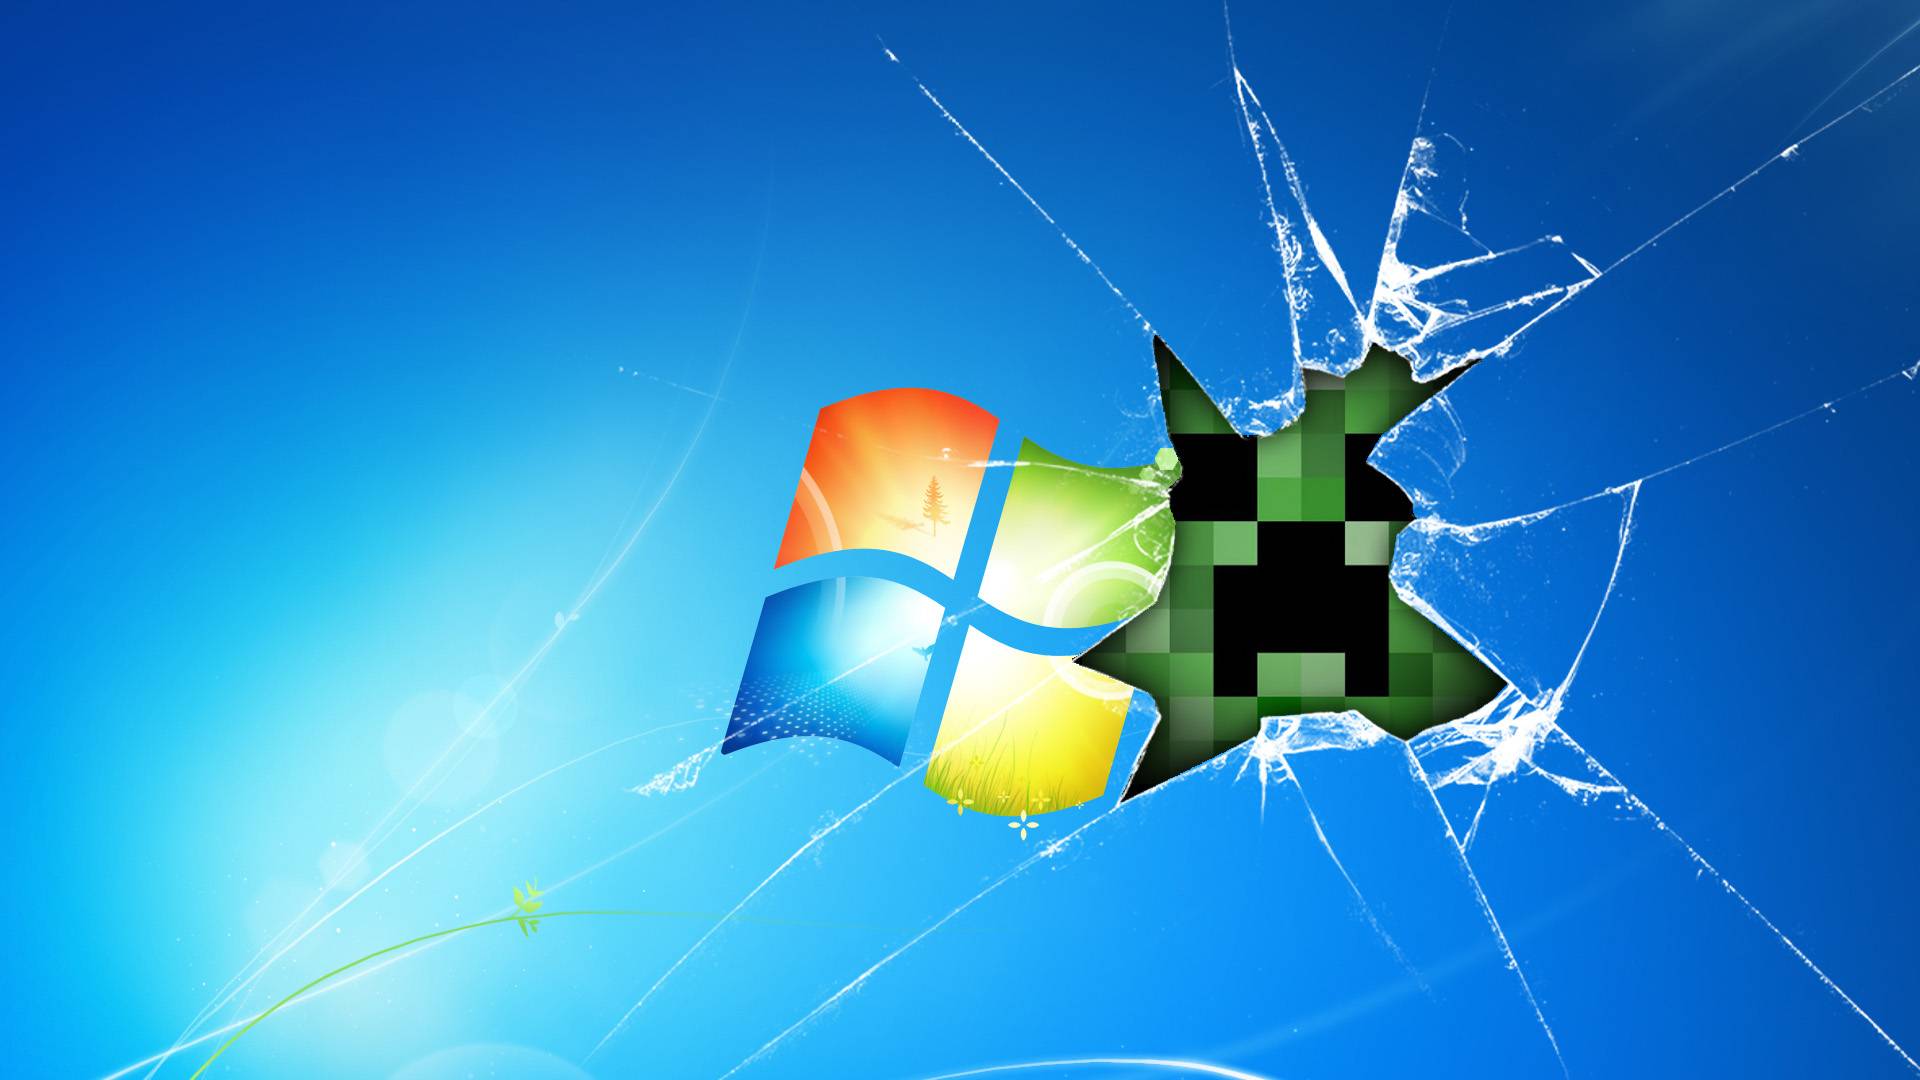 Windows Creeper Wallpaper Of A Breaking Out